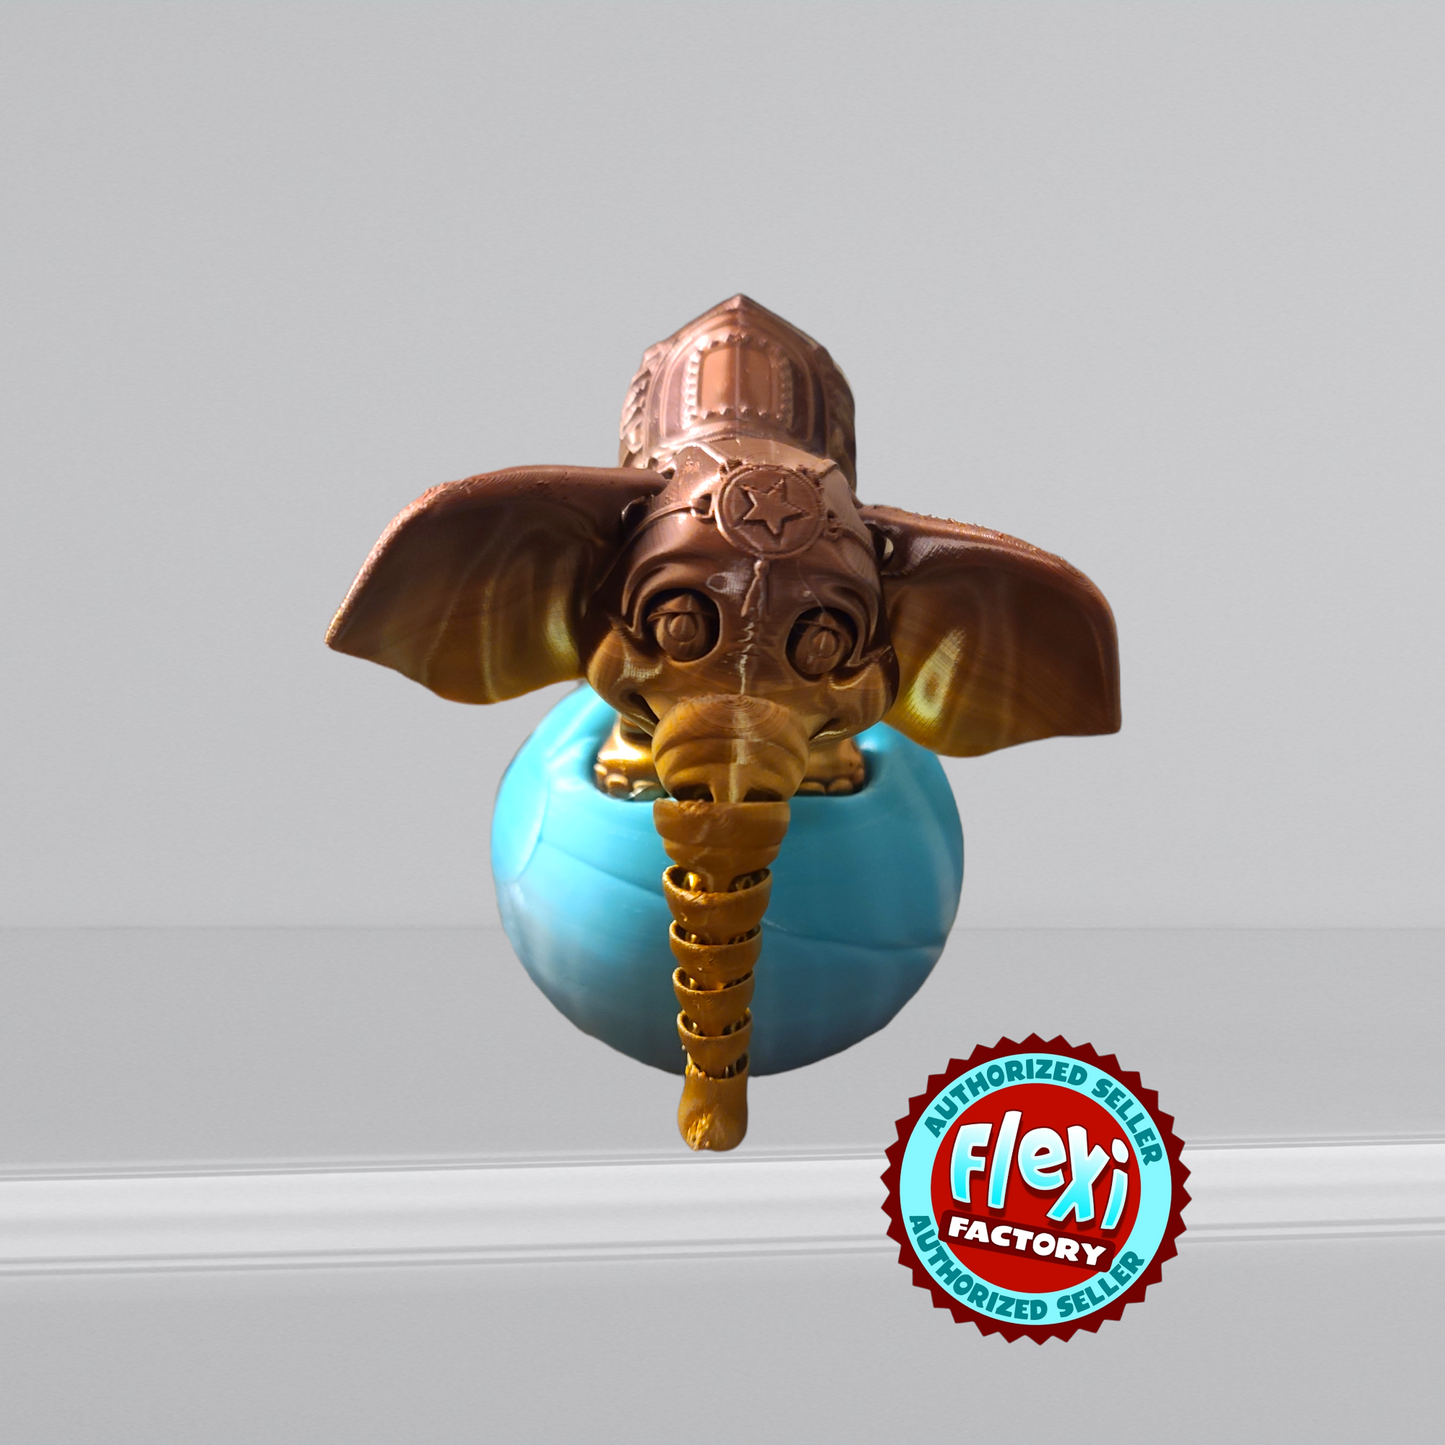 3d print elephant, circus animal, fidget toy, elephant and ball, kid toy, 3d print gift, glow in the dark, 3d animal, fidget, Articulate elephant, ball